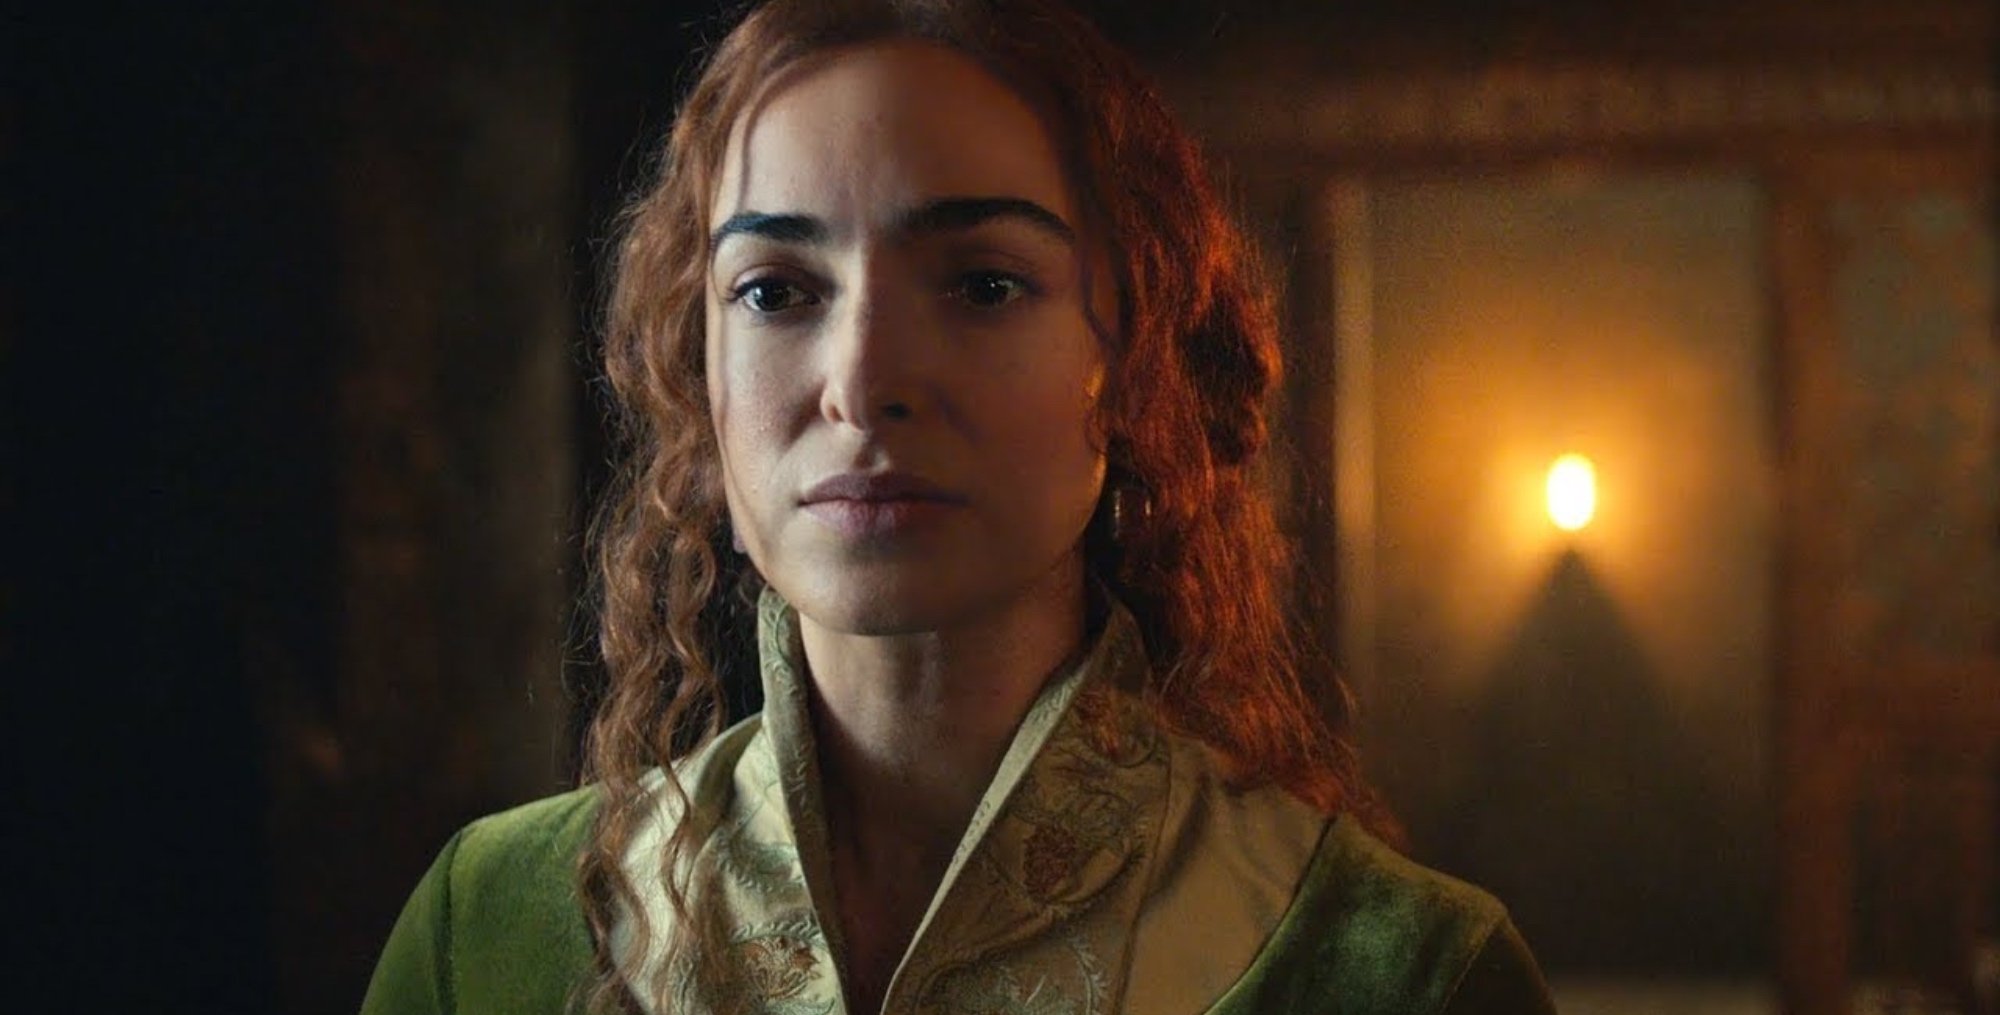 Triss in 'The Witcher' Season 2 episode 4 love triangle wearing green dress.